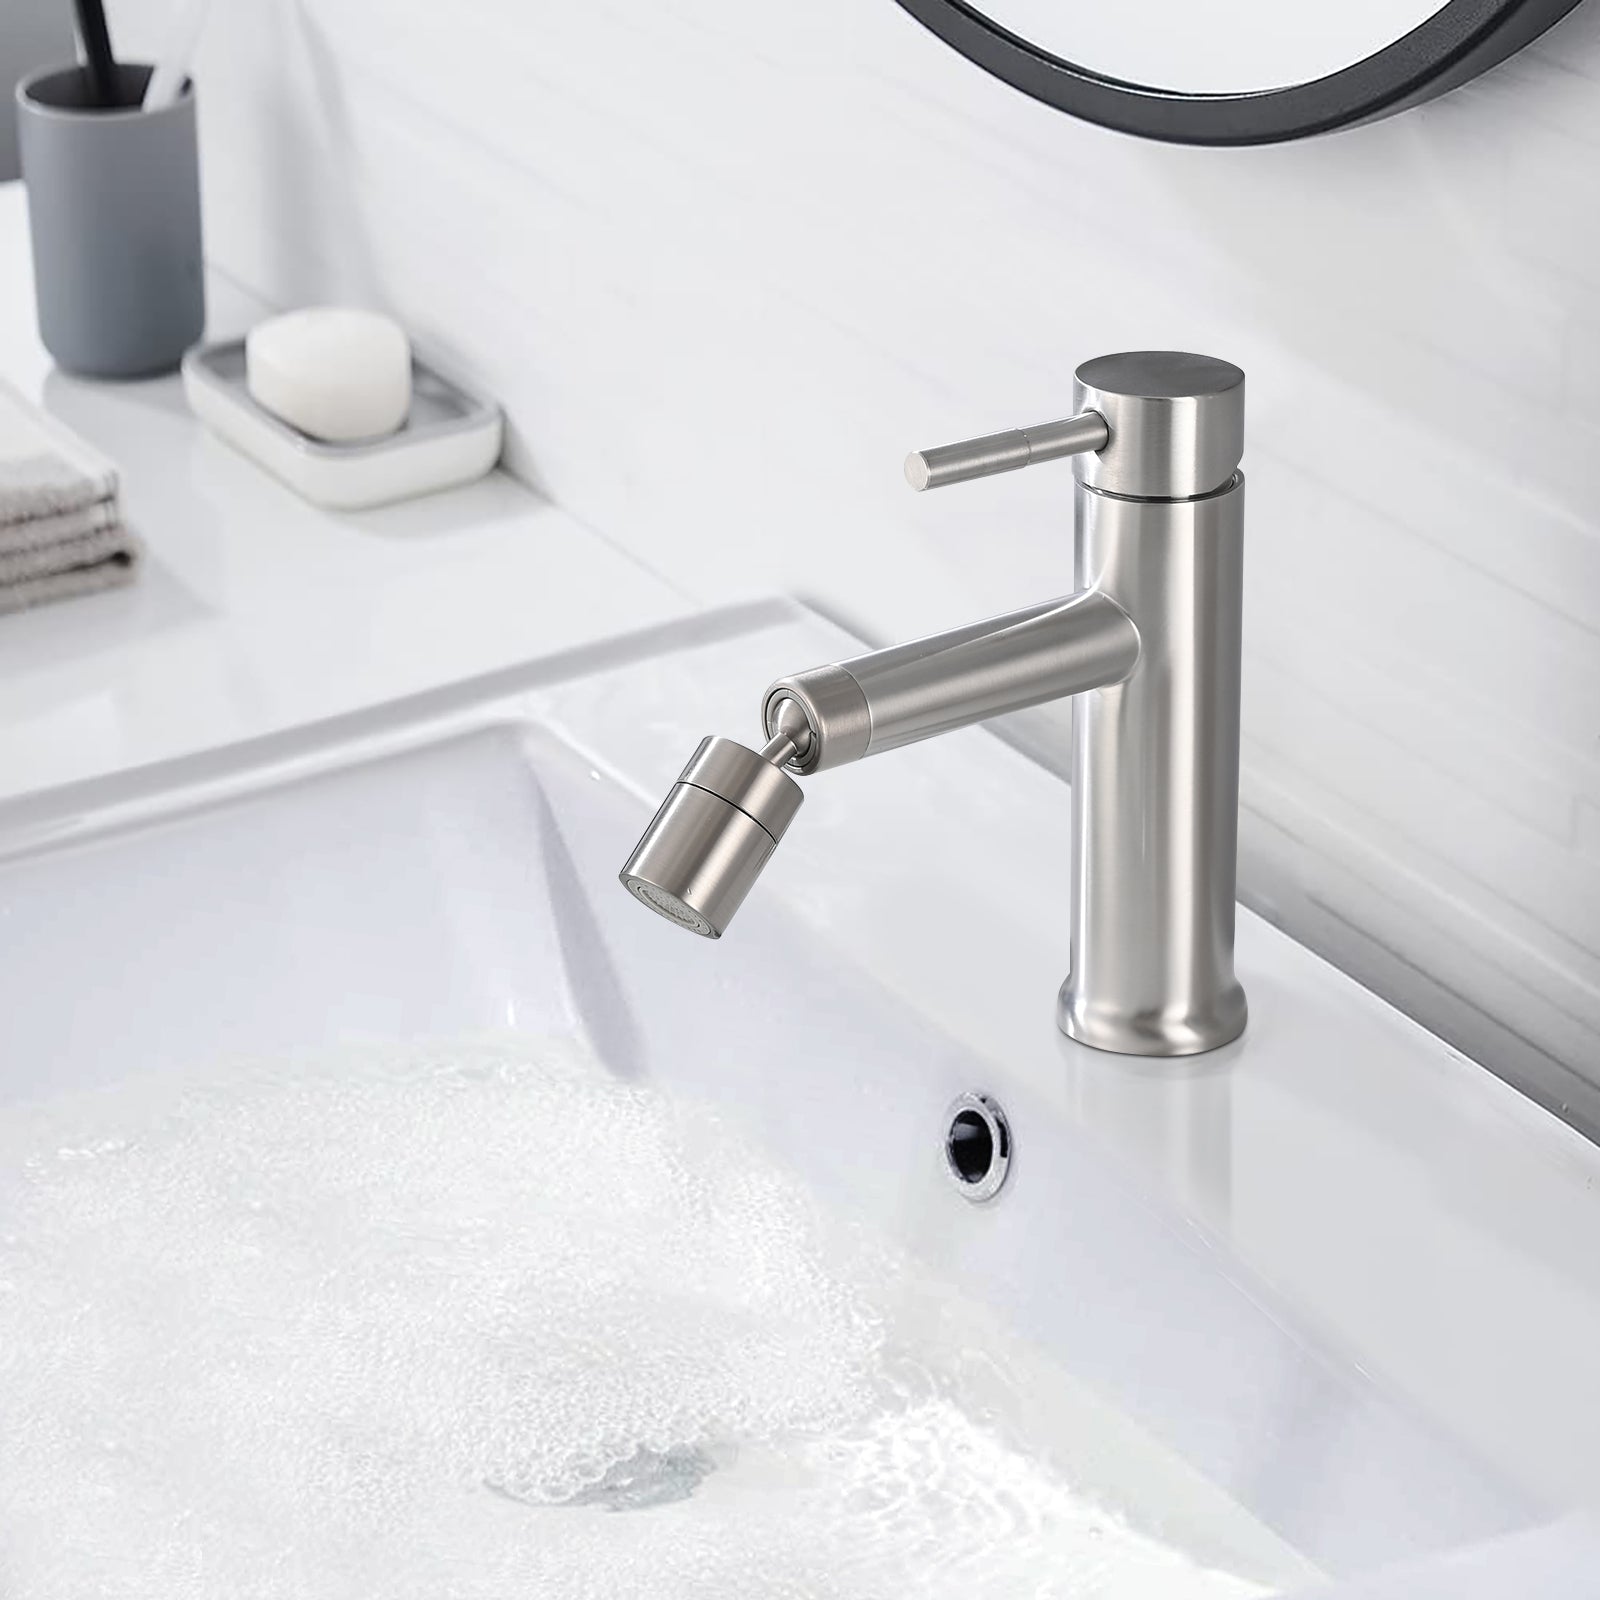 Brushed Nickle Bathroom Faucet for 2 Mode Faucet for